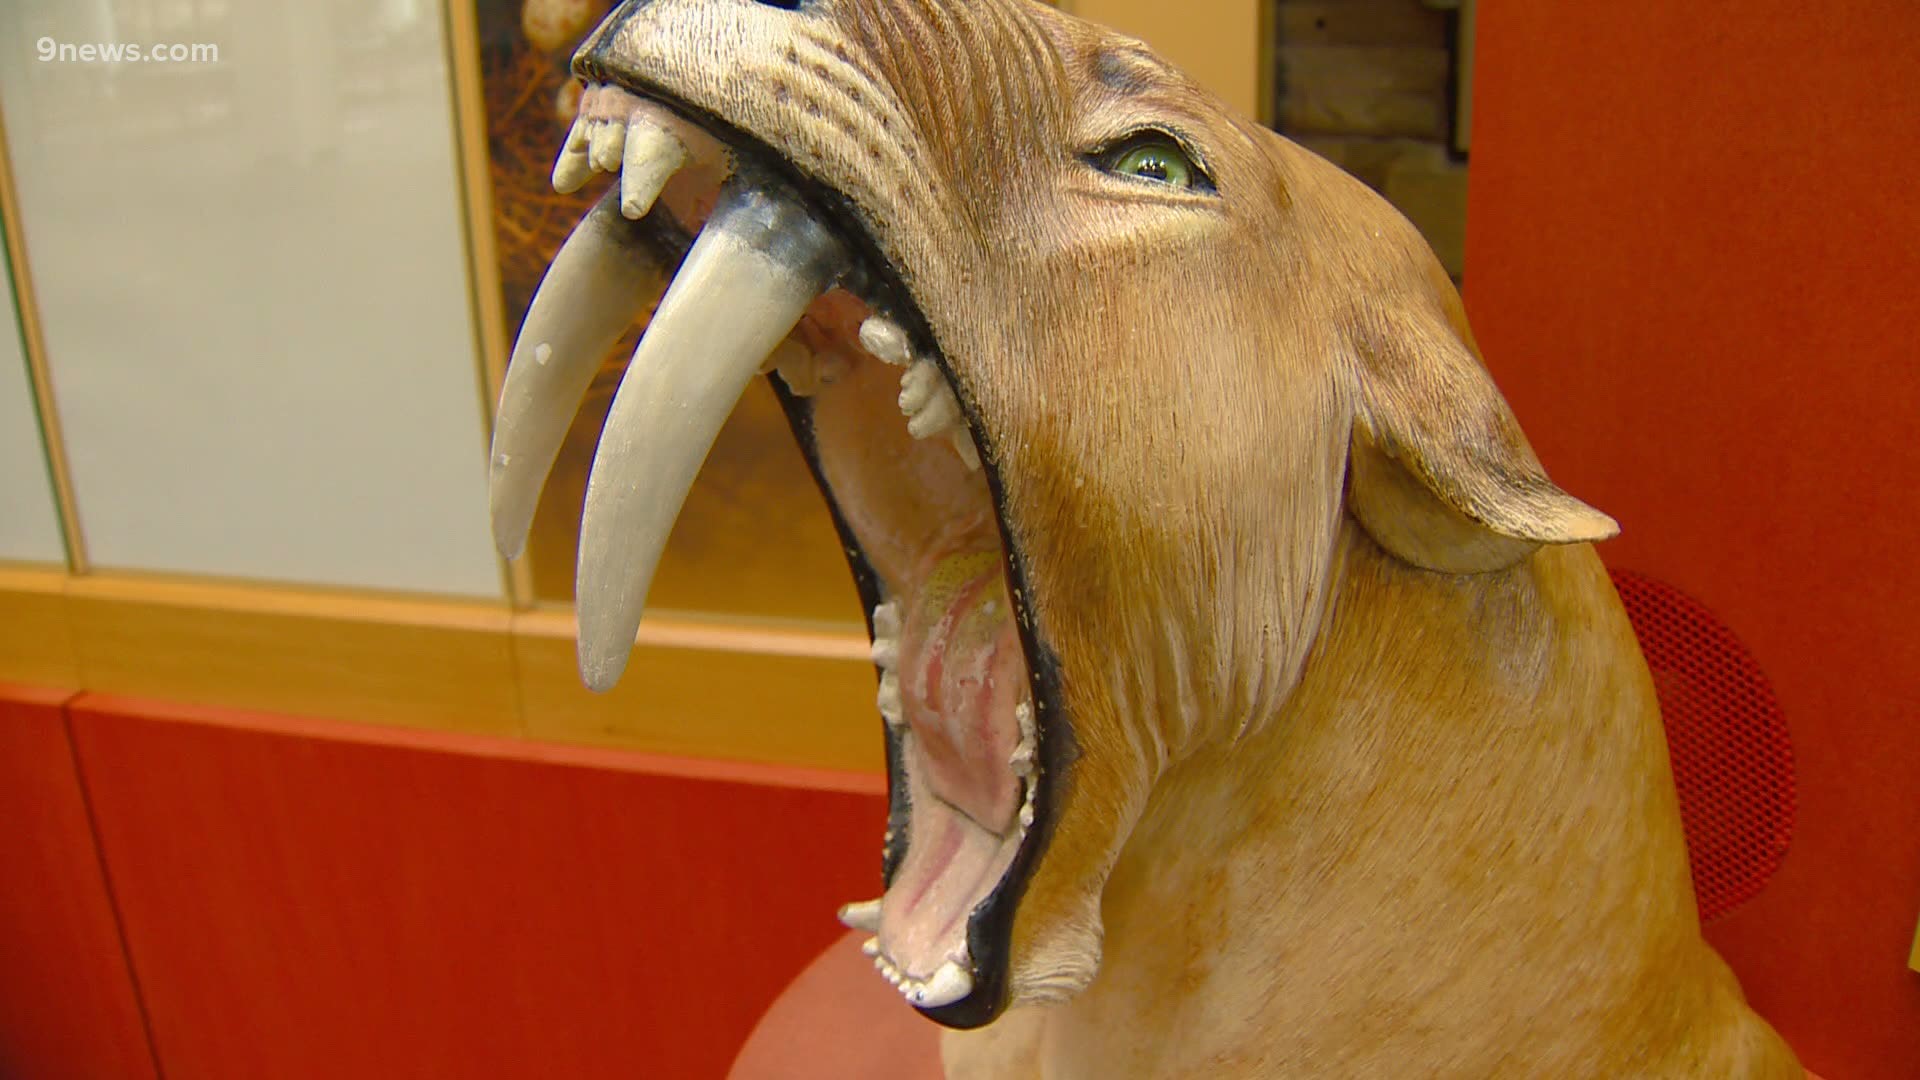 For 47 years, visitors to the DMNS have been greeted by a "roar." Photojournalist Tom Cole went in search of the story behind the museum's famous saber-toothed cat.